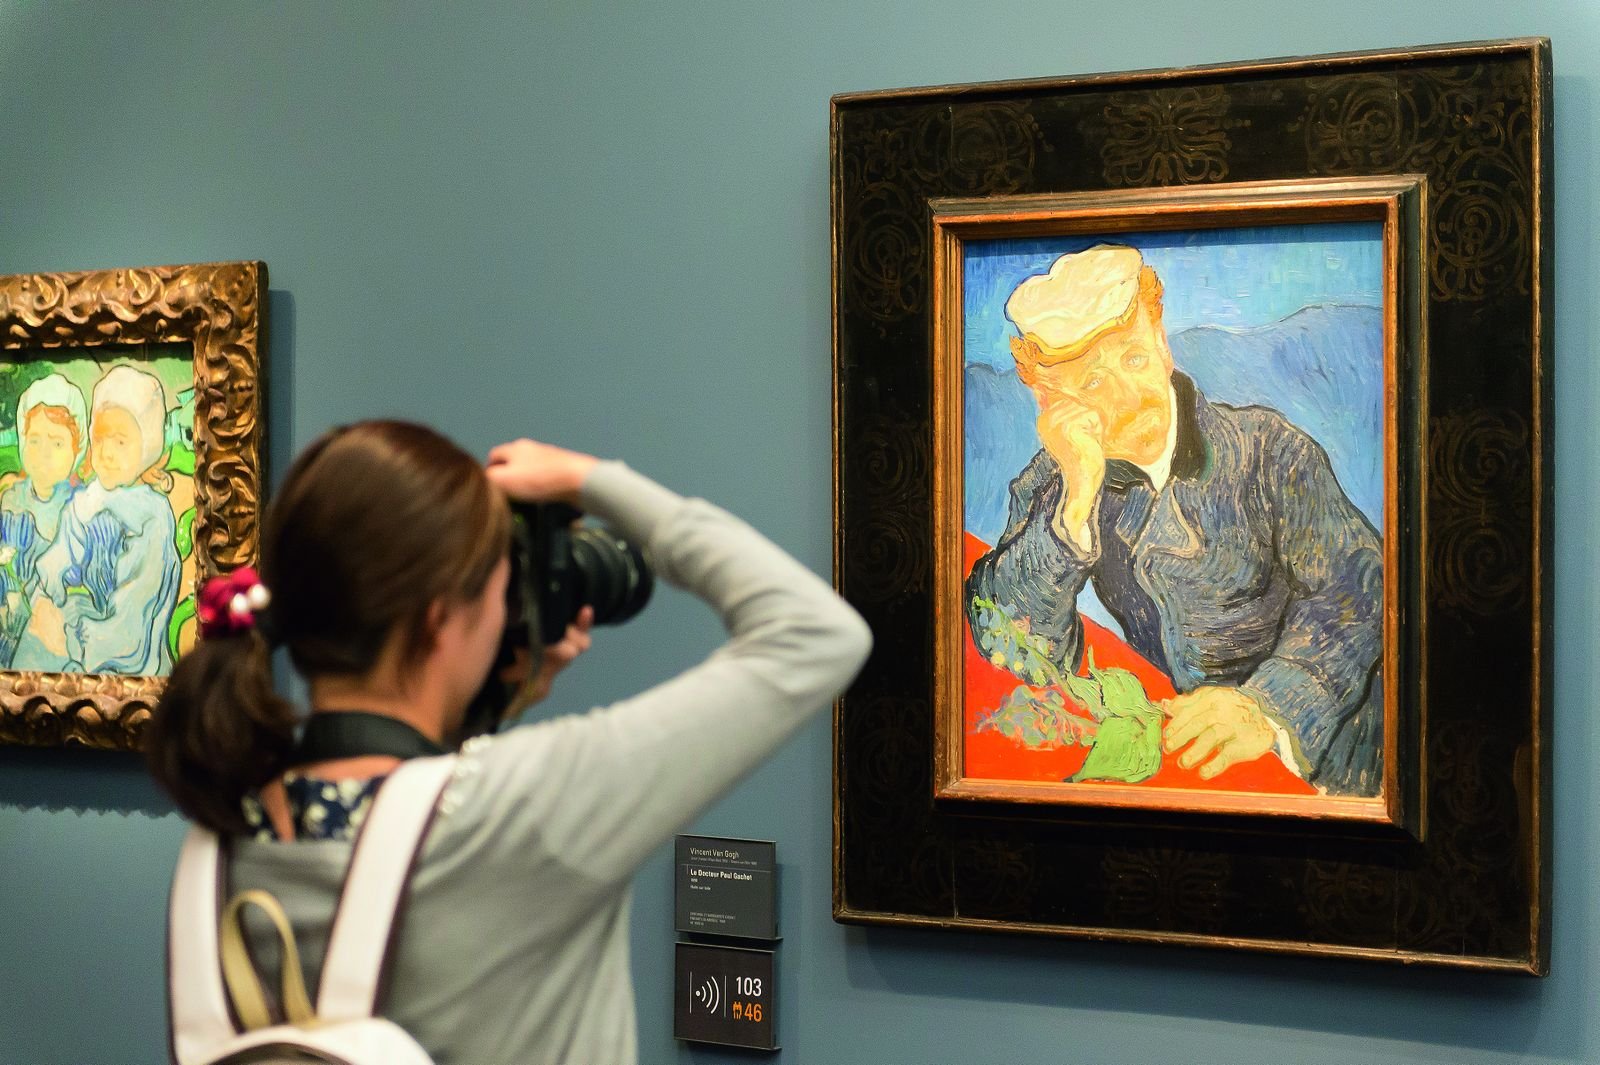 Vincent Van Gogh's time in Provence: his prolific art period. -  TripUSAFrance